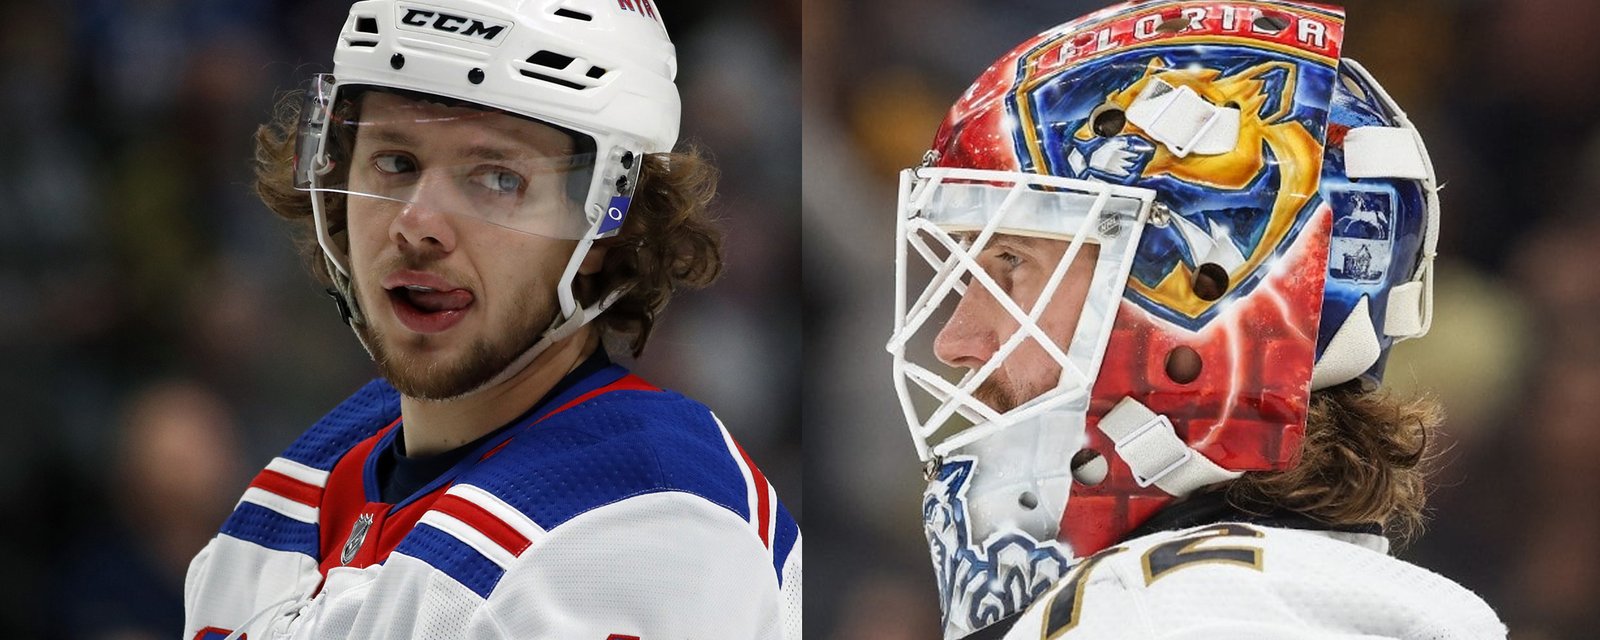 Significant shift in Panarin and Bobrovsky’s friendship during Eastern Final